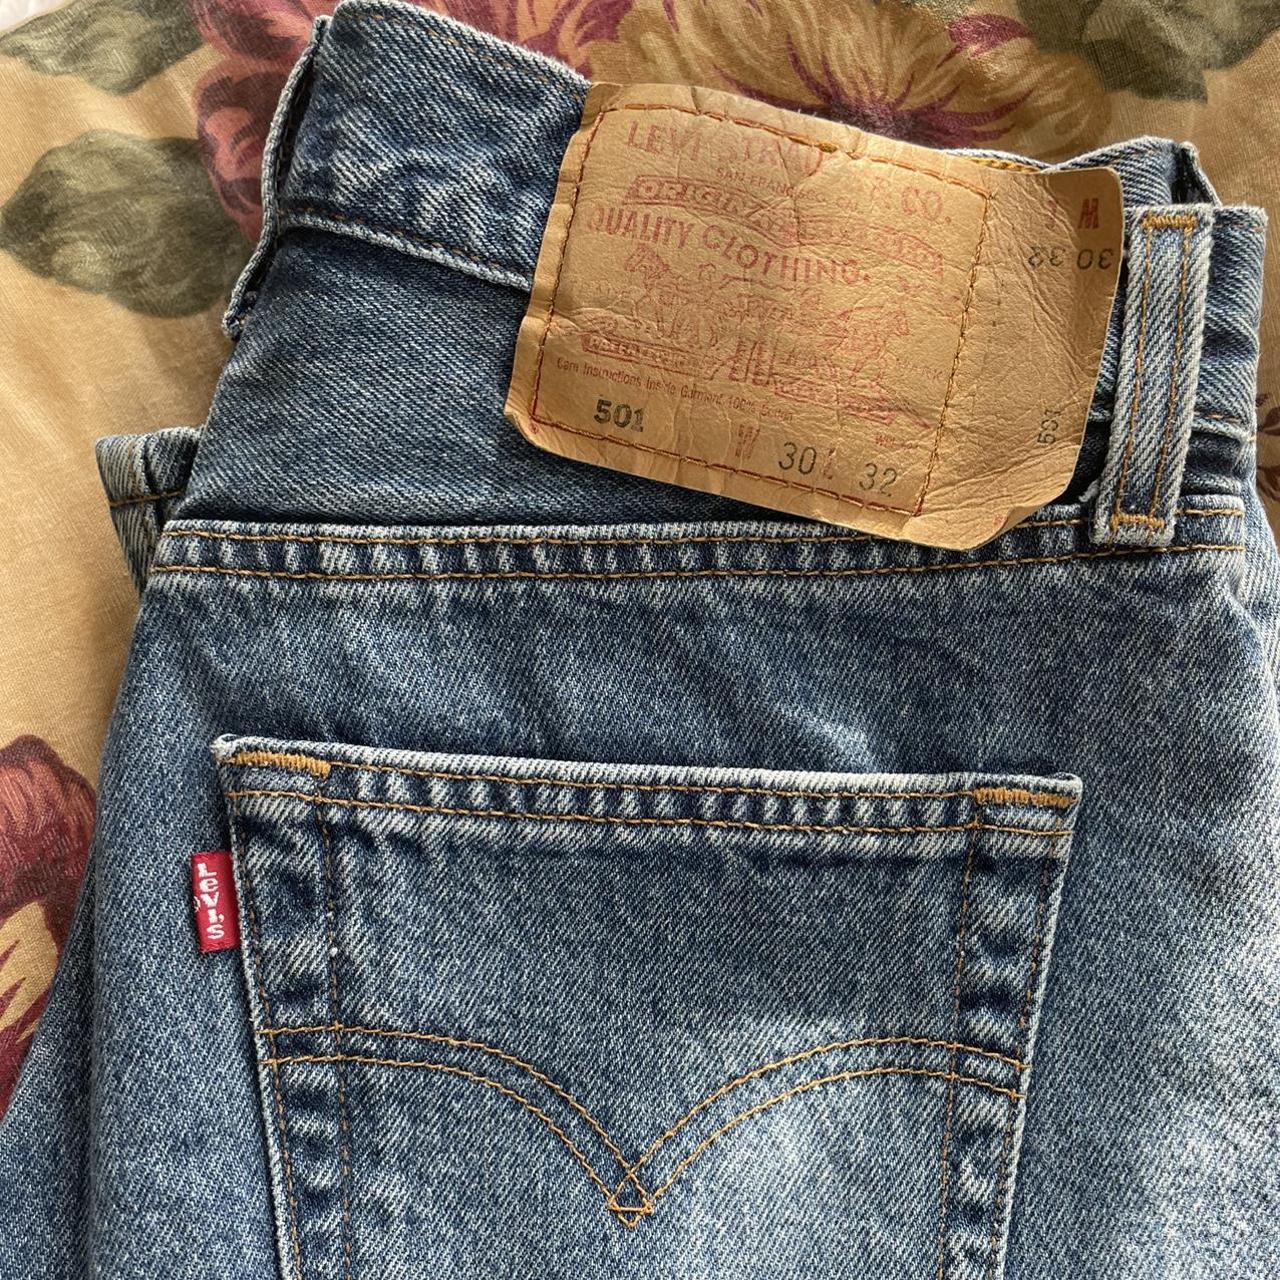 Levi's Women's Navy and Blue Jeans (4)